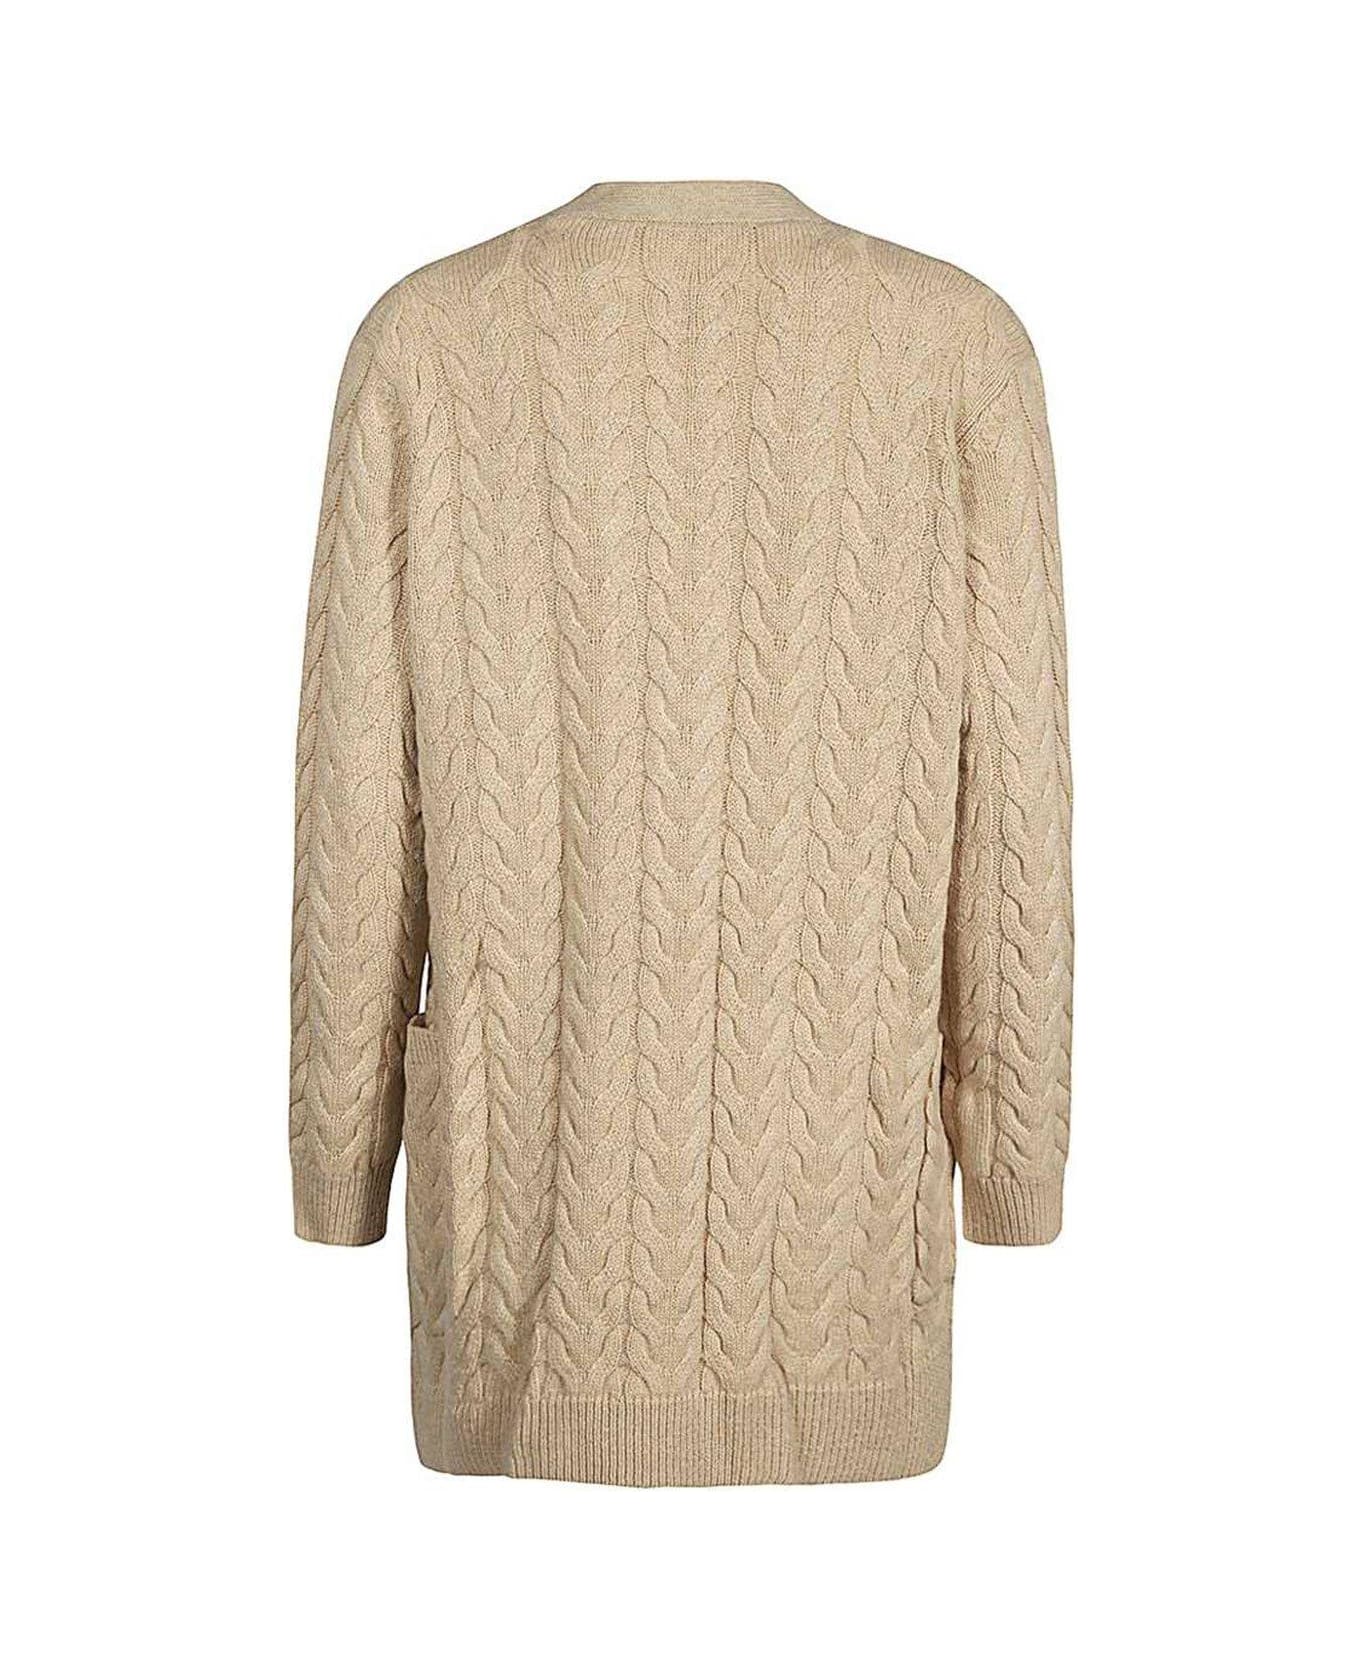 Max Mara Buttoned Long-sleeved Knitted Cardigan